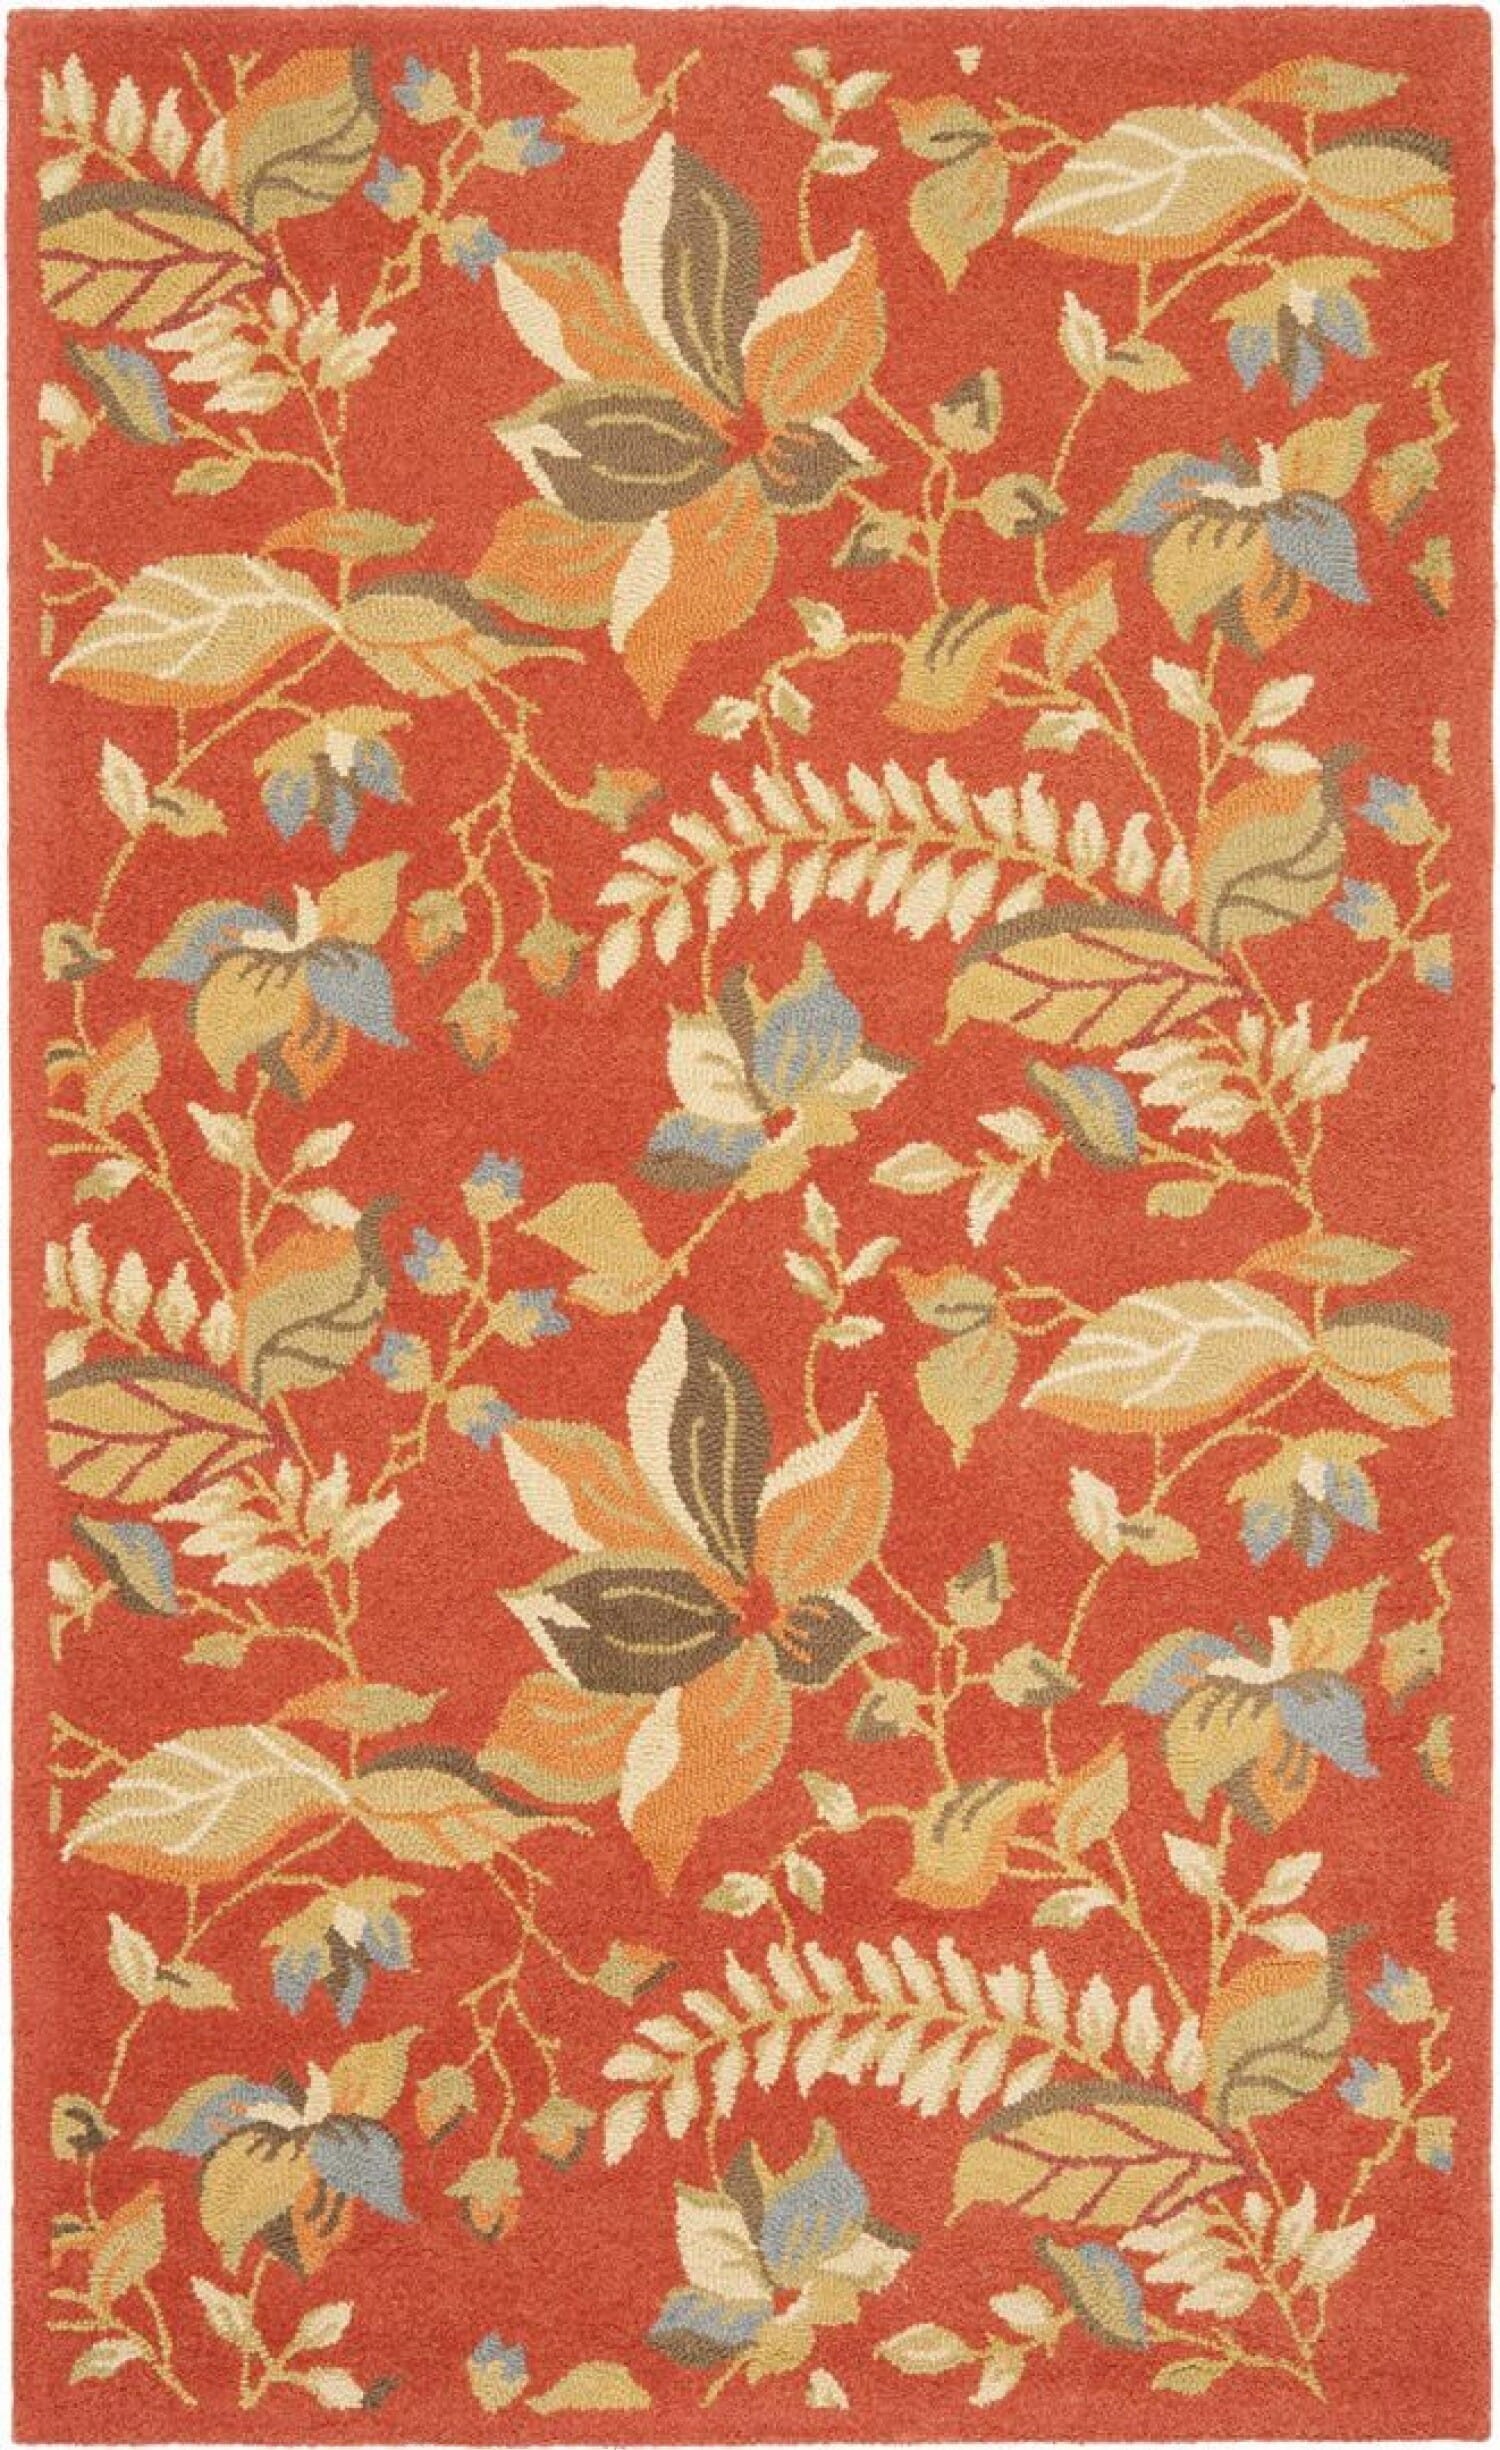 Safavieh Blossom blm913a Rust / Multi Floral / Country Area Rug